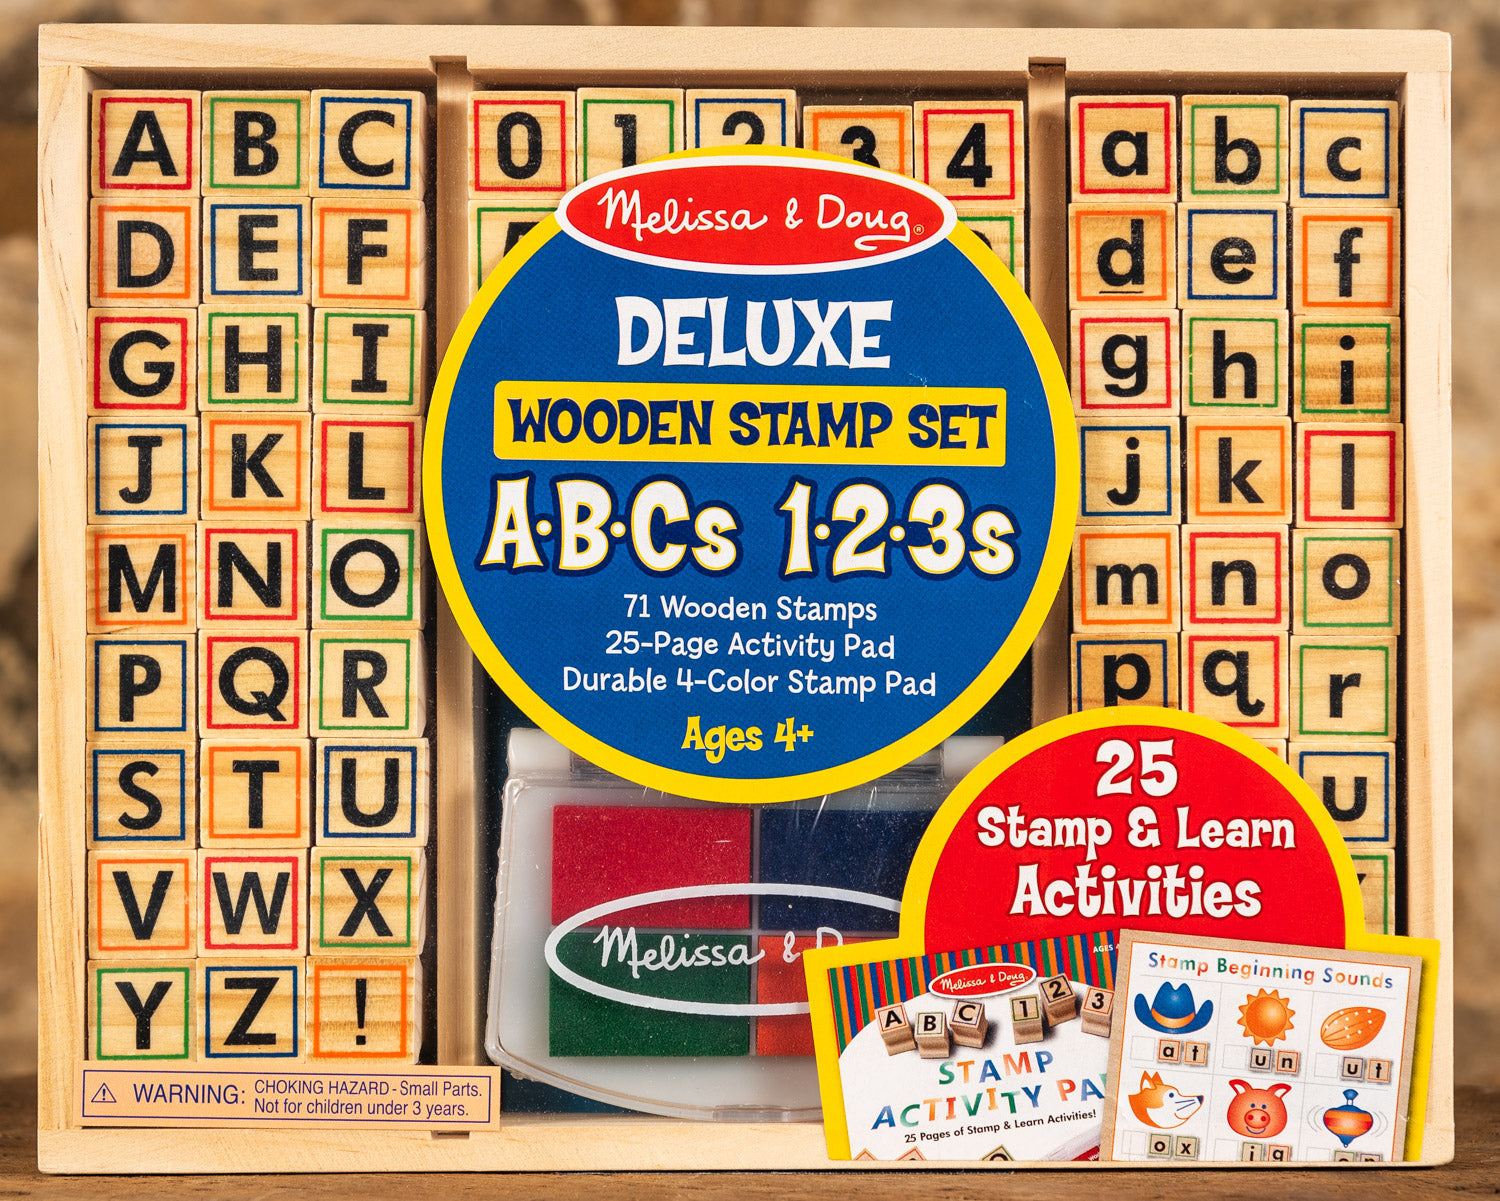 Wooden Stamp Set - Deluxe ABC's & 123's – Foothill Mercantile